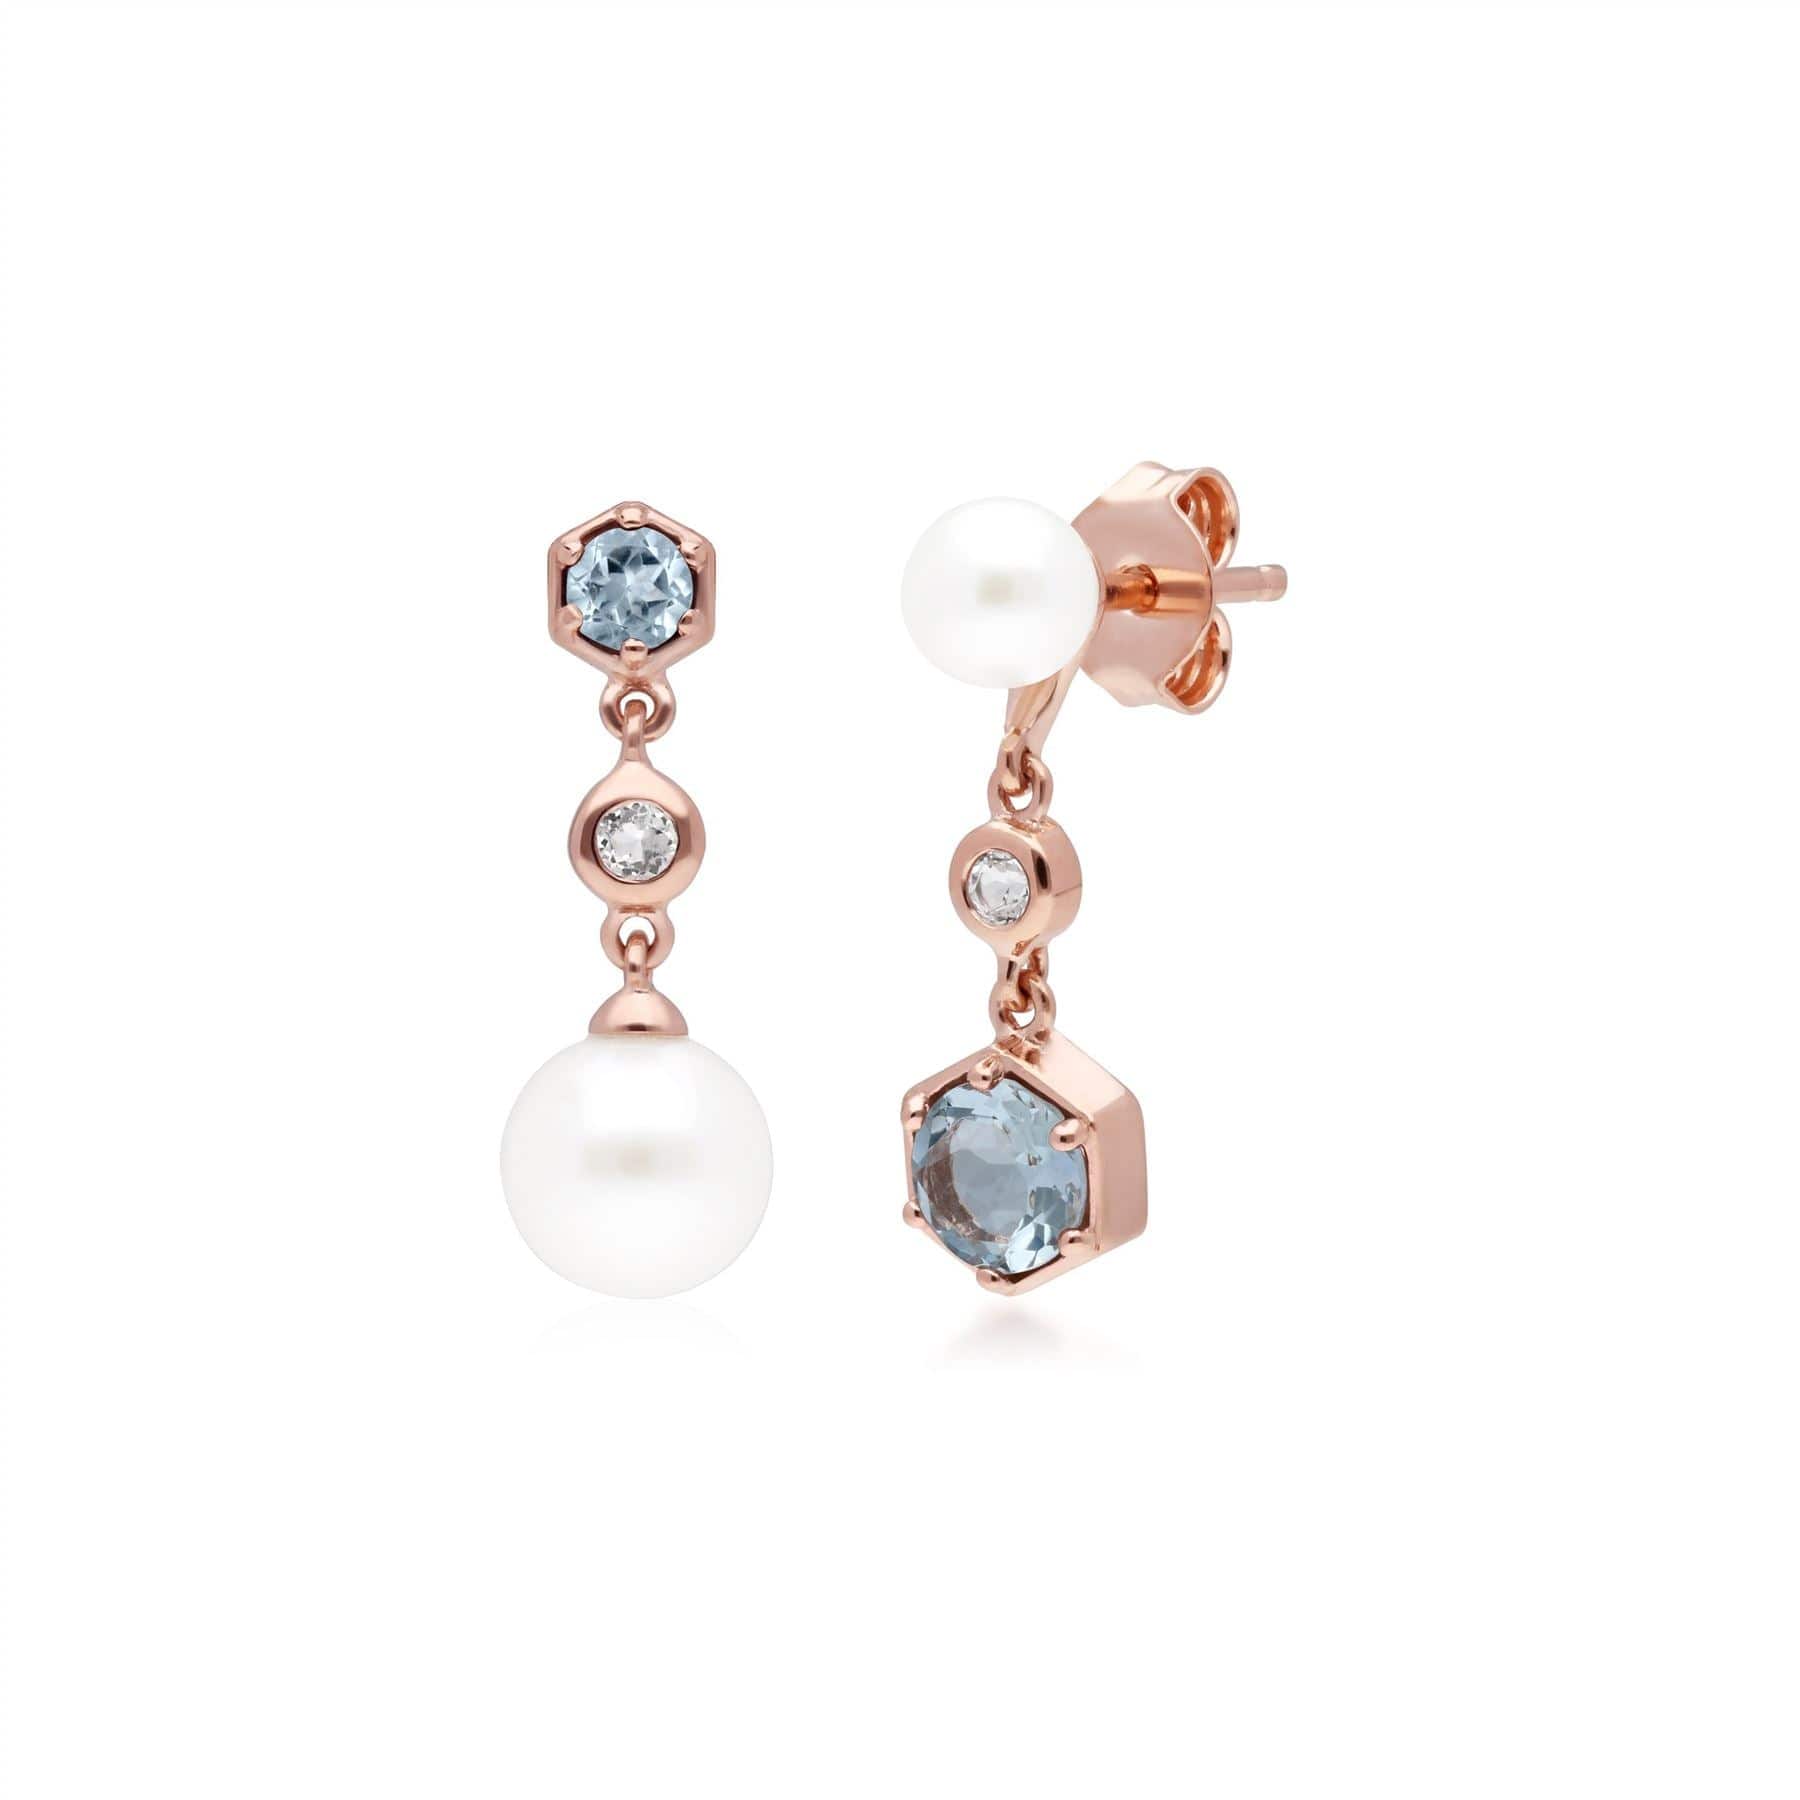 270E030305925 Modern Pearl, Aquamarine & Topaz Mismatched Drop Earrings in Rose Gold Plated Silver 1